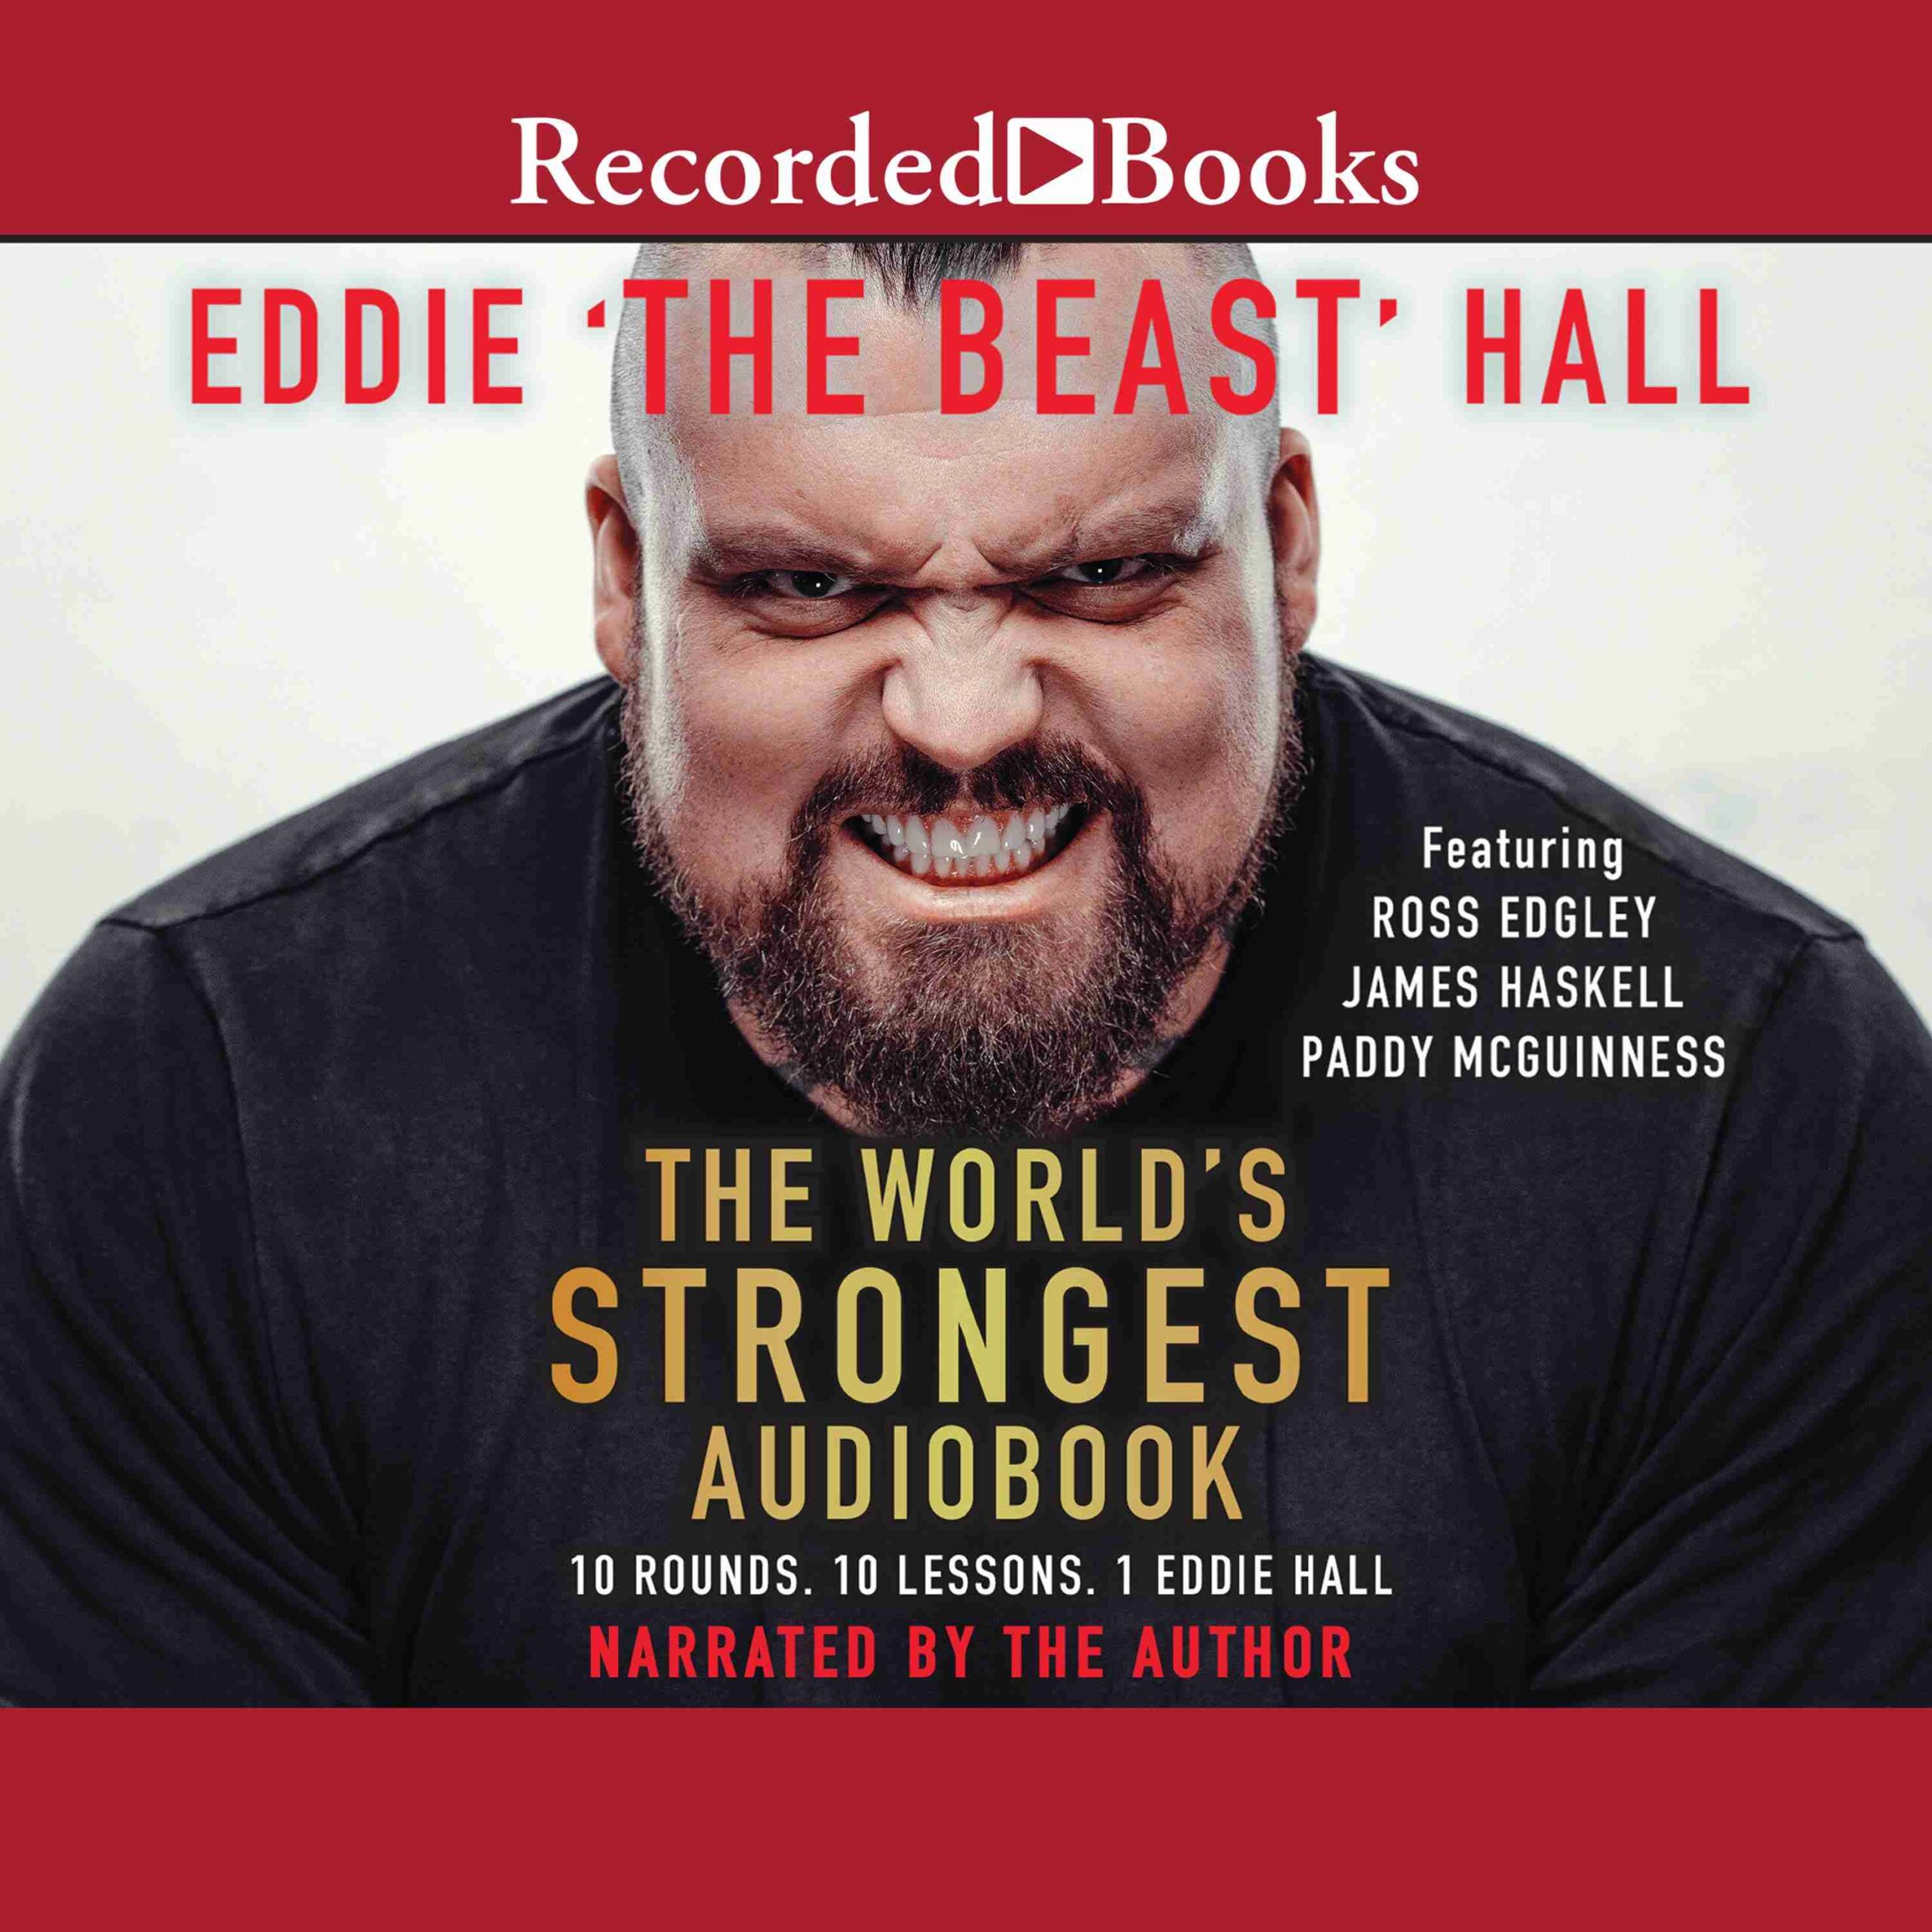 The World’s Strongest Audiobook